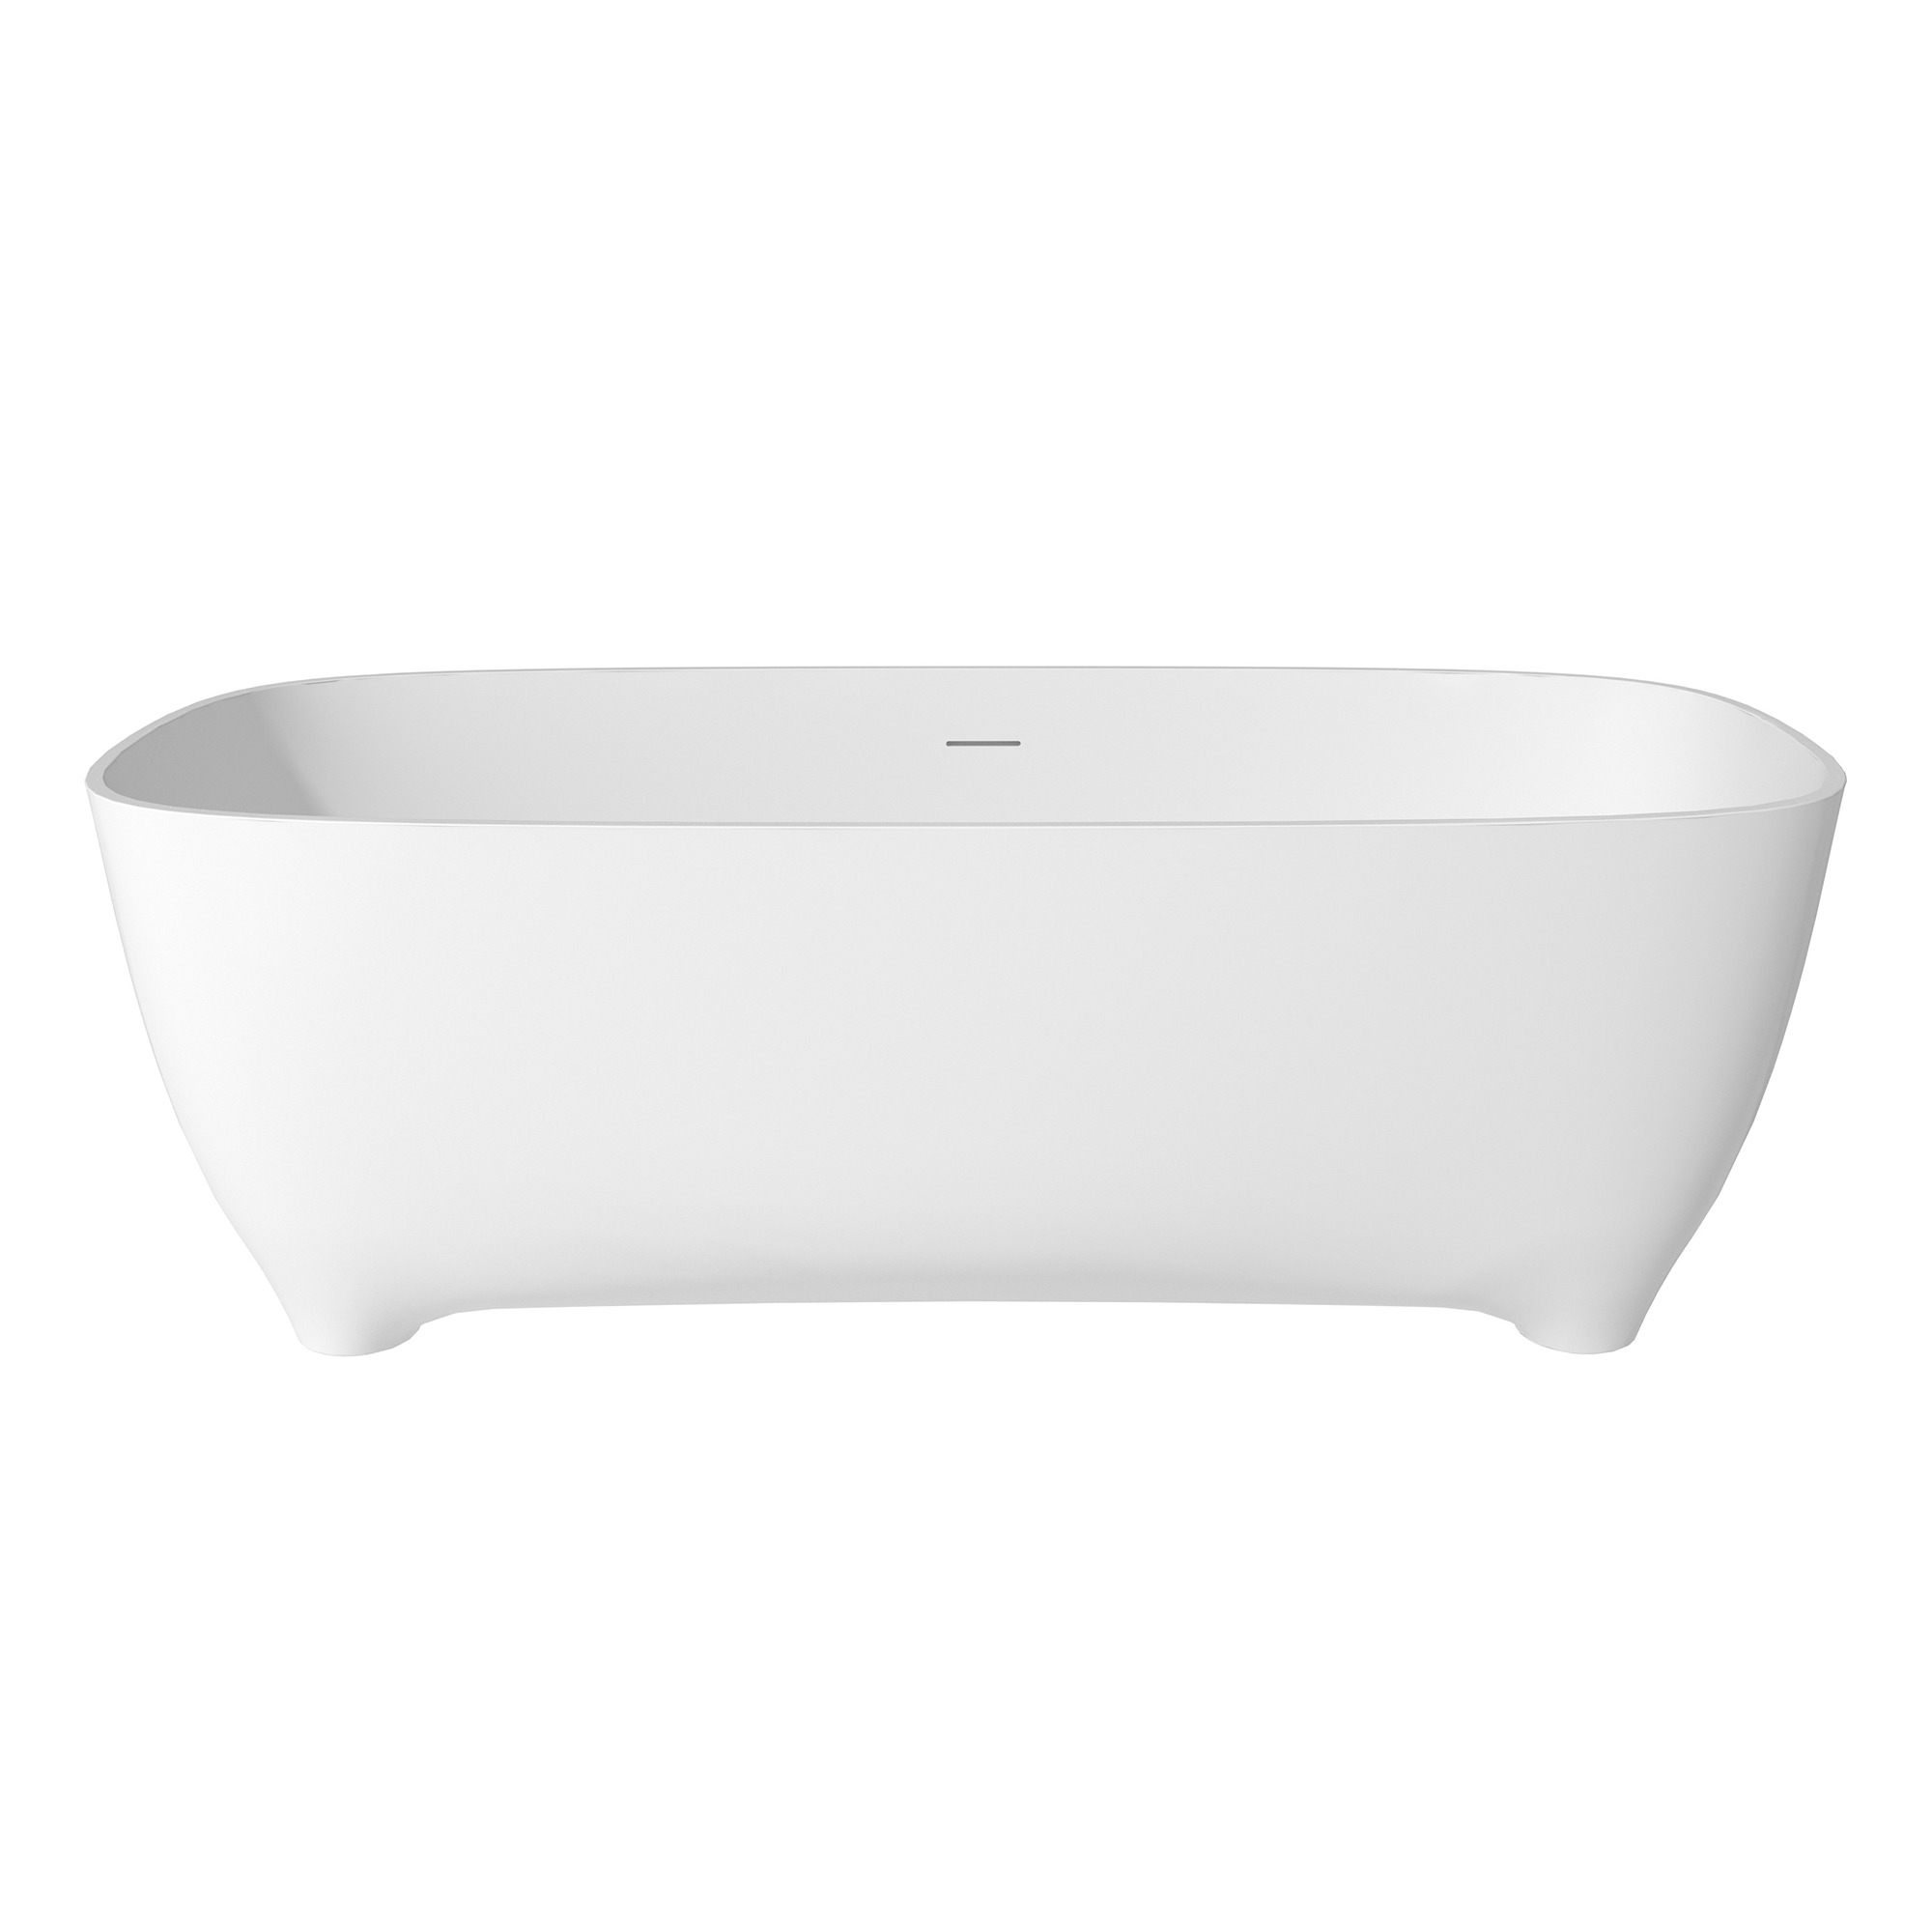 67" Adult-Sized Freestanding Soaking Tub with Raised Pedestal in Matte White, Crafted in Solid Surface Stone(With/without Bathtub Faucet)